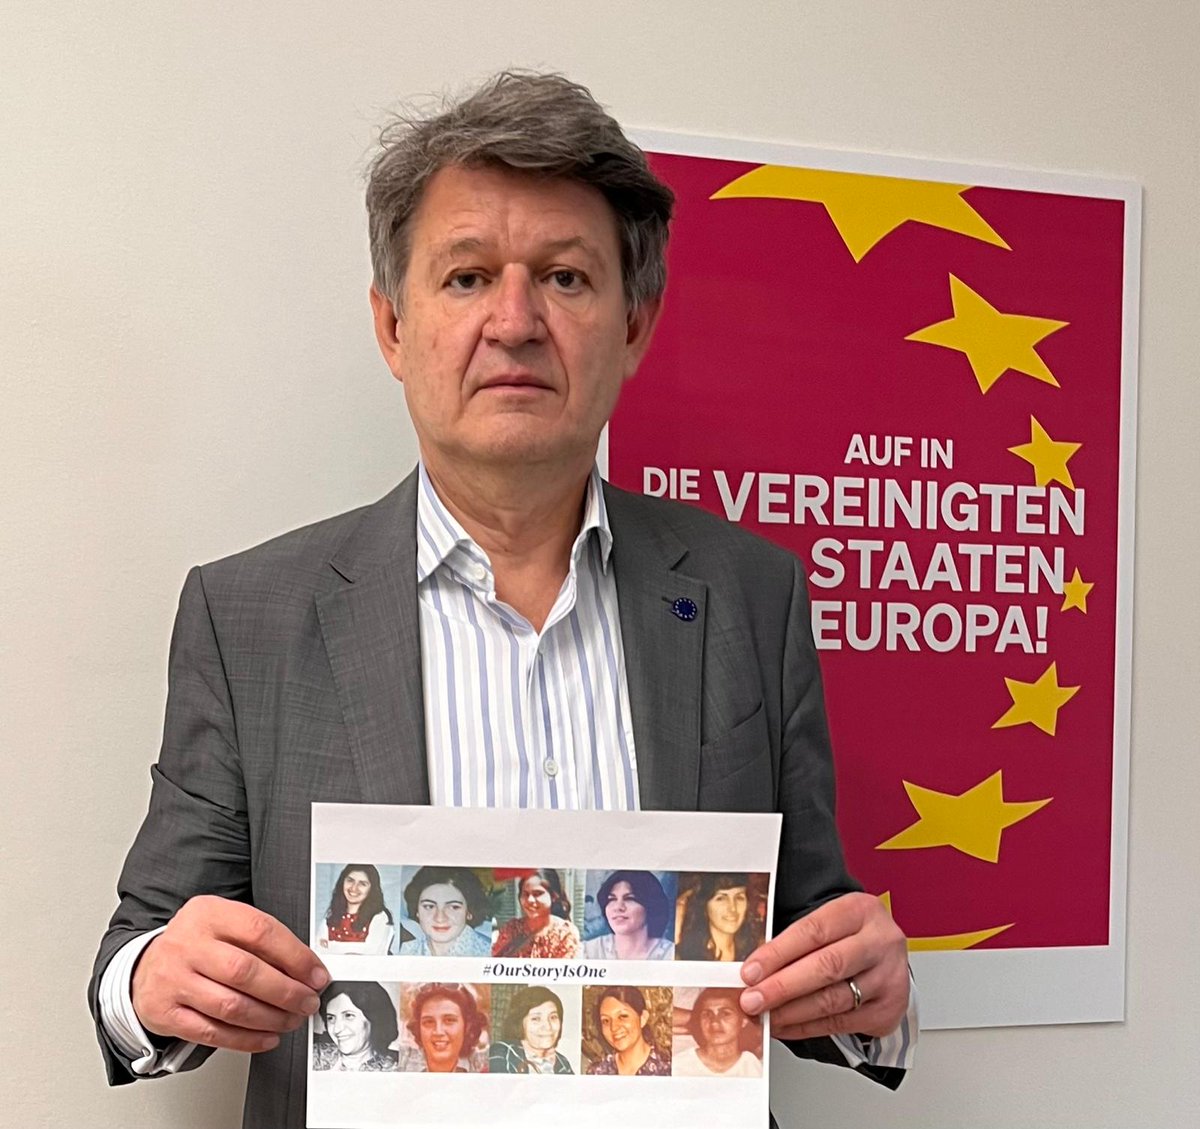 Thank you @OeParl MP @HBrandstaetter for supporting #OurStoryIsOne campaign for #HumanRights #equality #freedom of ALL Iranians of all ethnicities/faiths/no faith seeking betterment of society side by side and for highlighting the 45 years of state persecution of #Bahais in #Iran